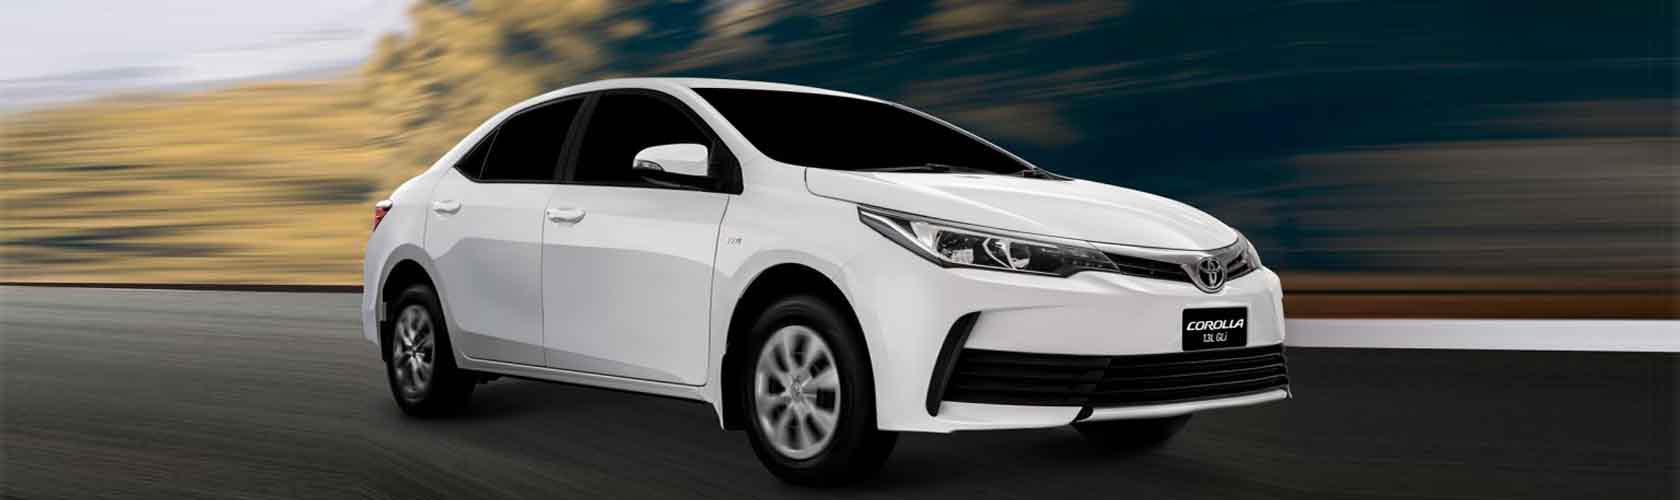 Corolla for Rent in Islamabad